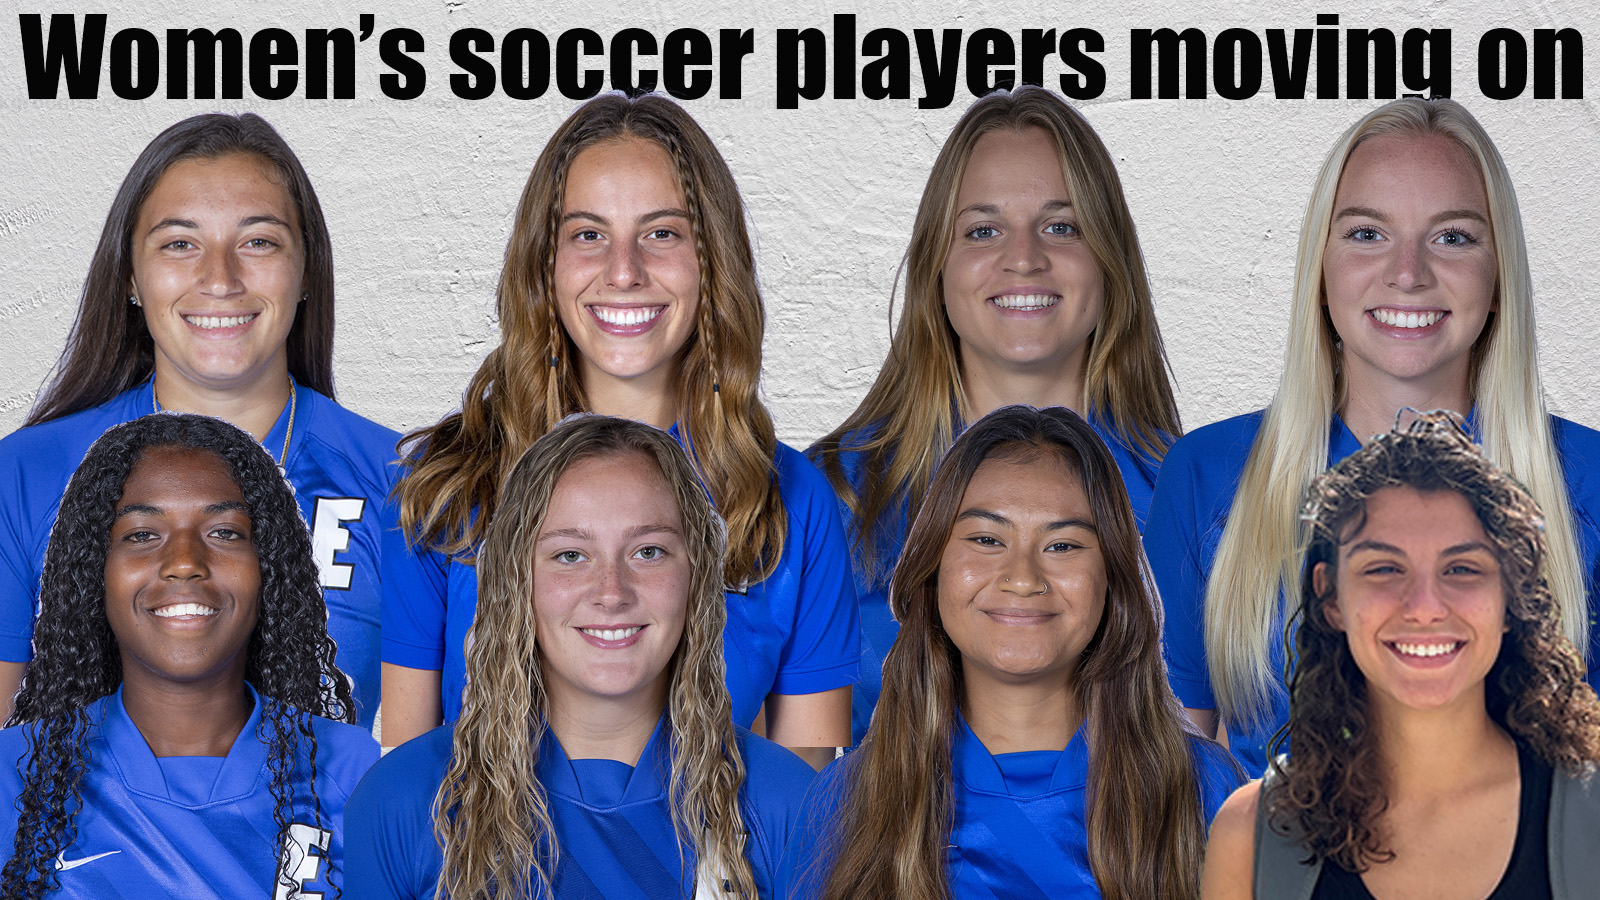 Eight EFSC women's soccer players moving on to play at four-year schools